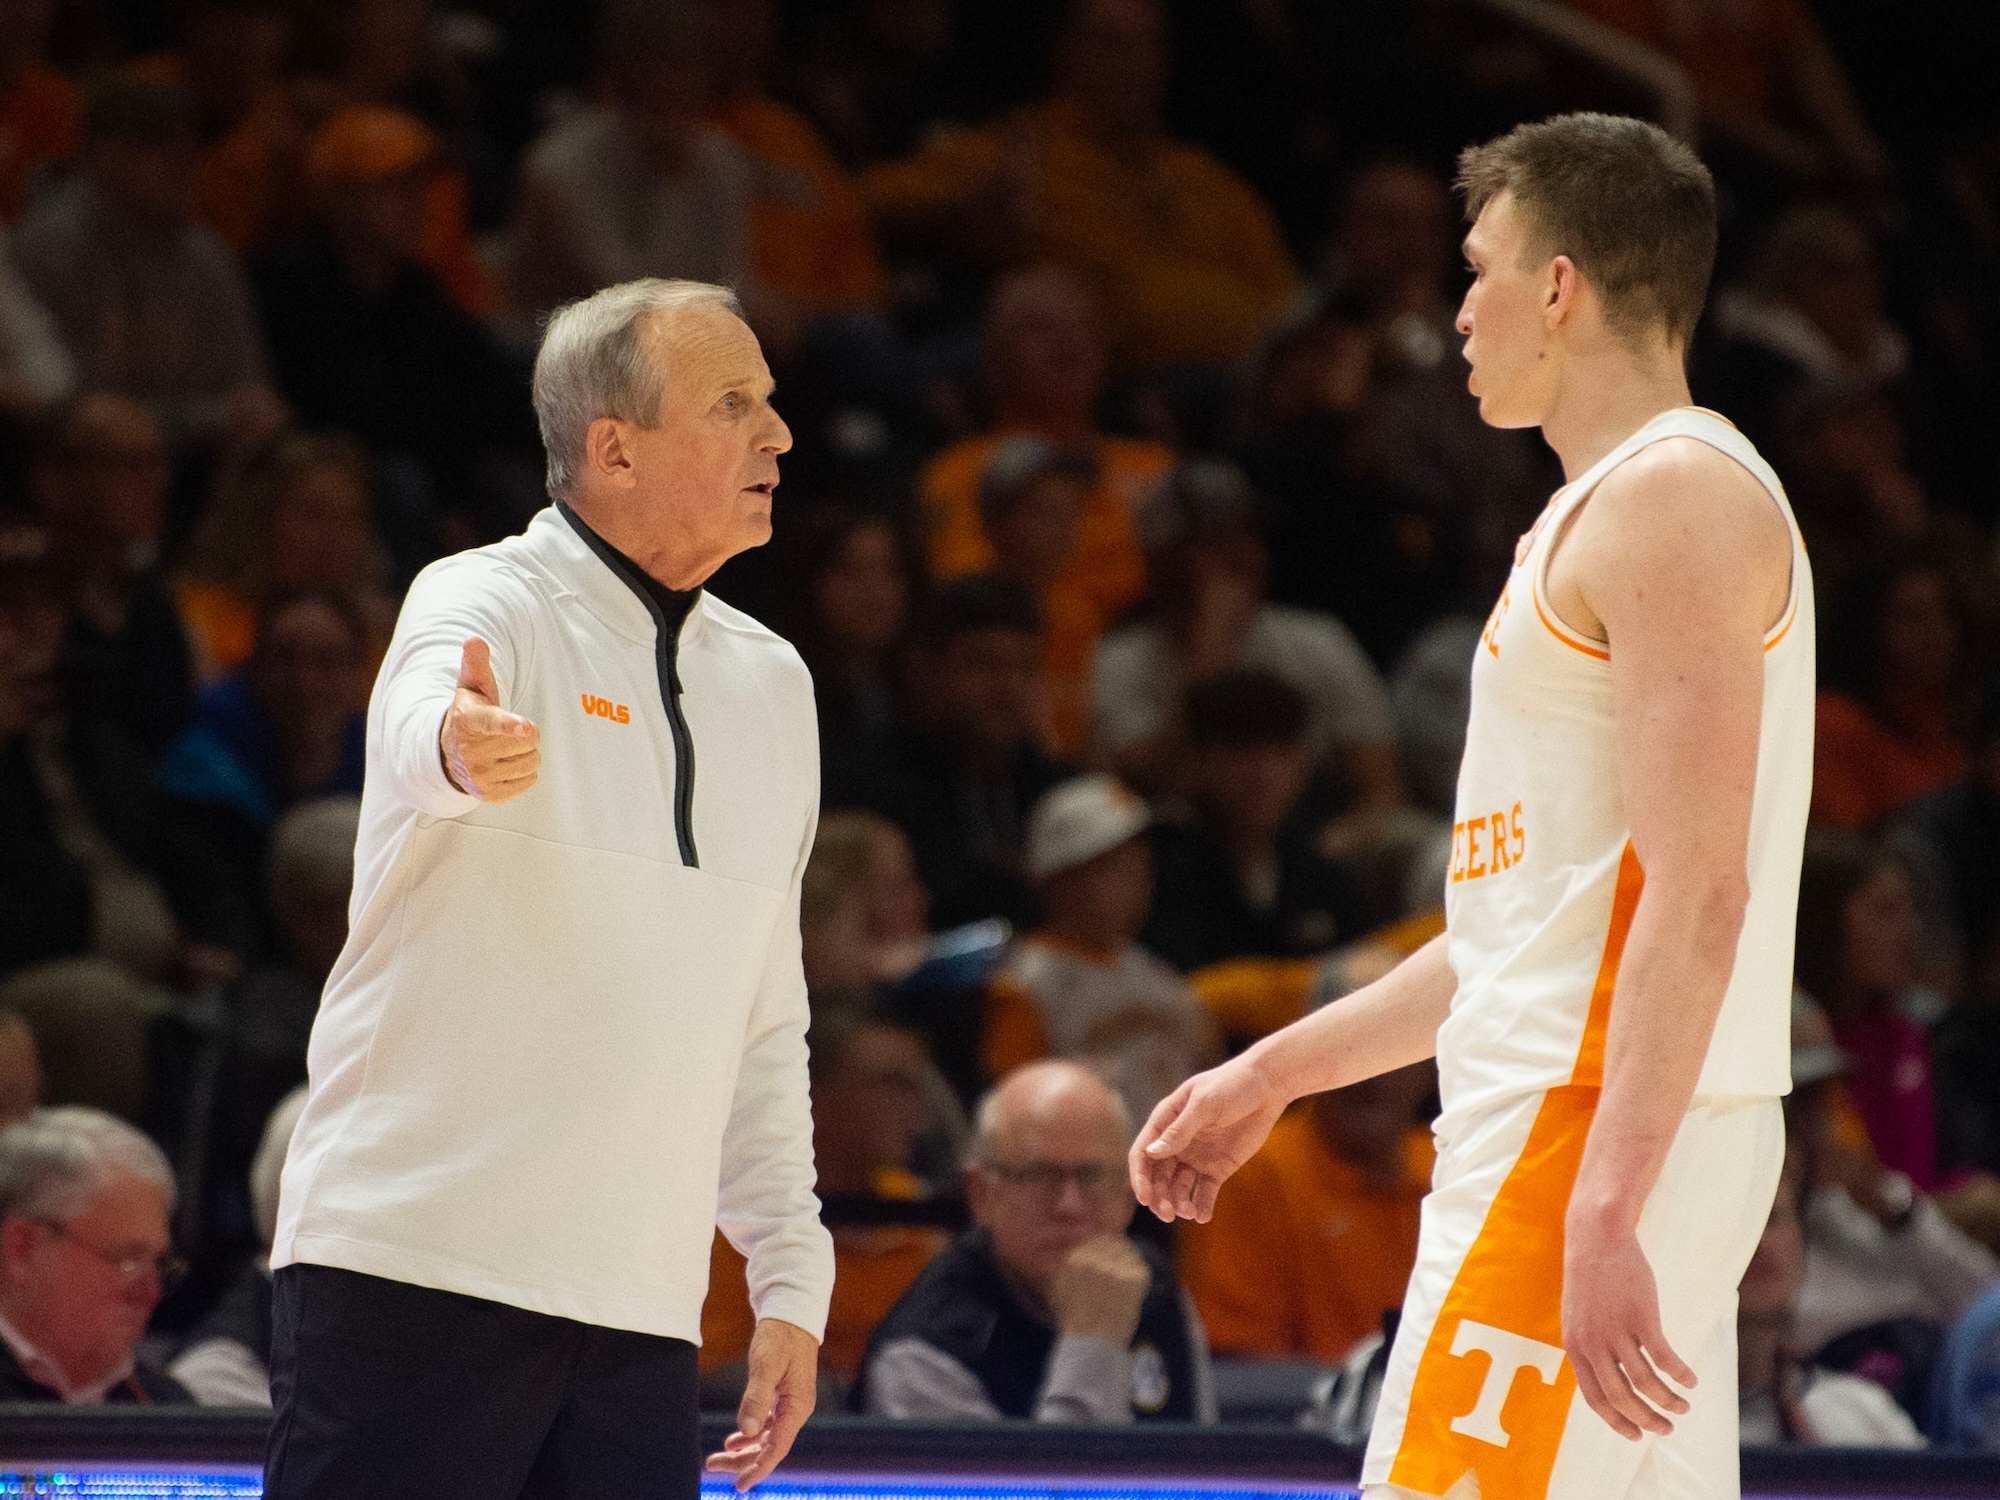 Barnes and Knecht are on a mission to bring an elusive men’s basketball national championship to Tennessee. 